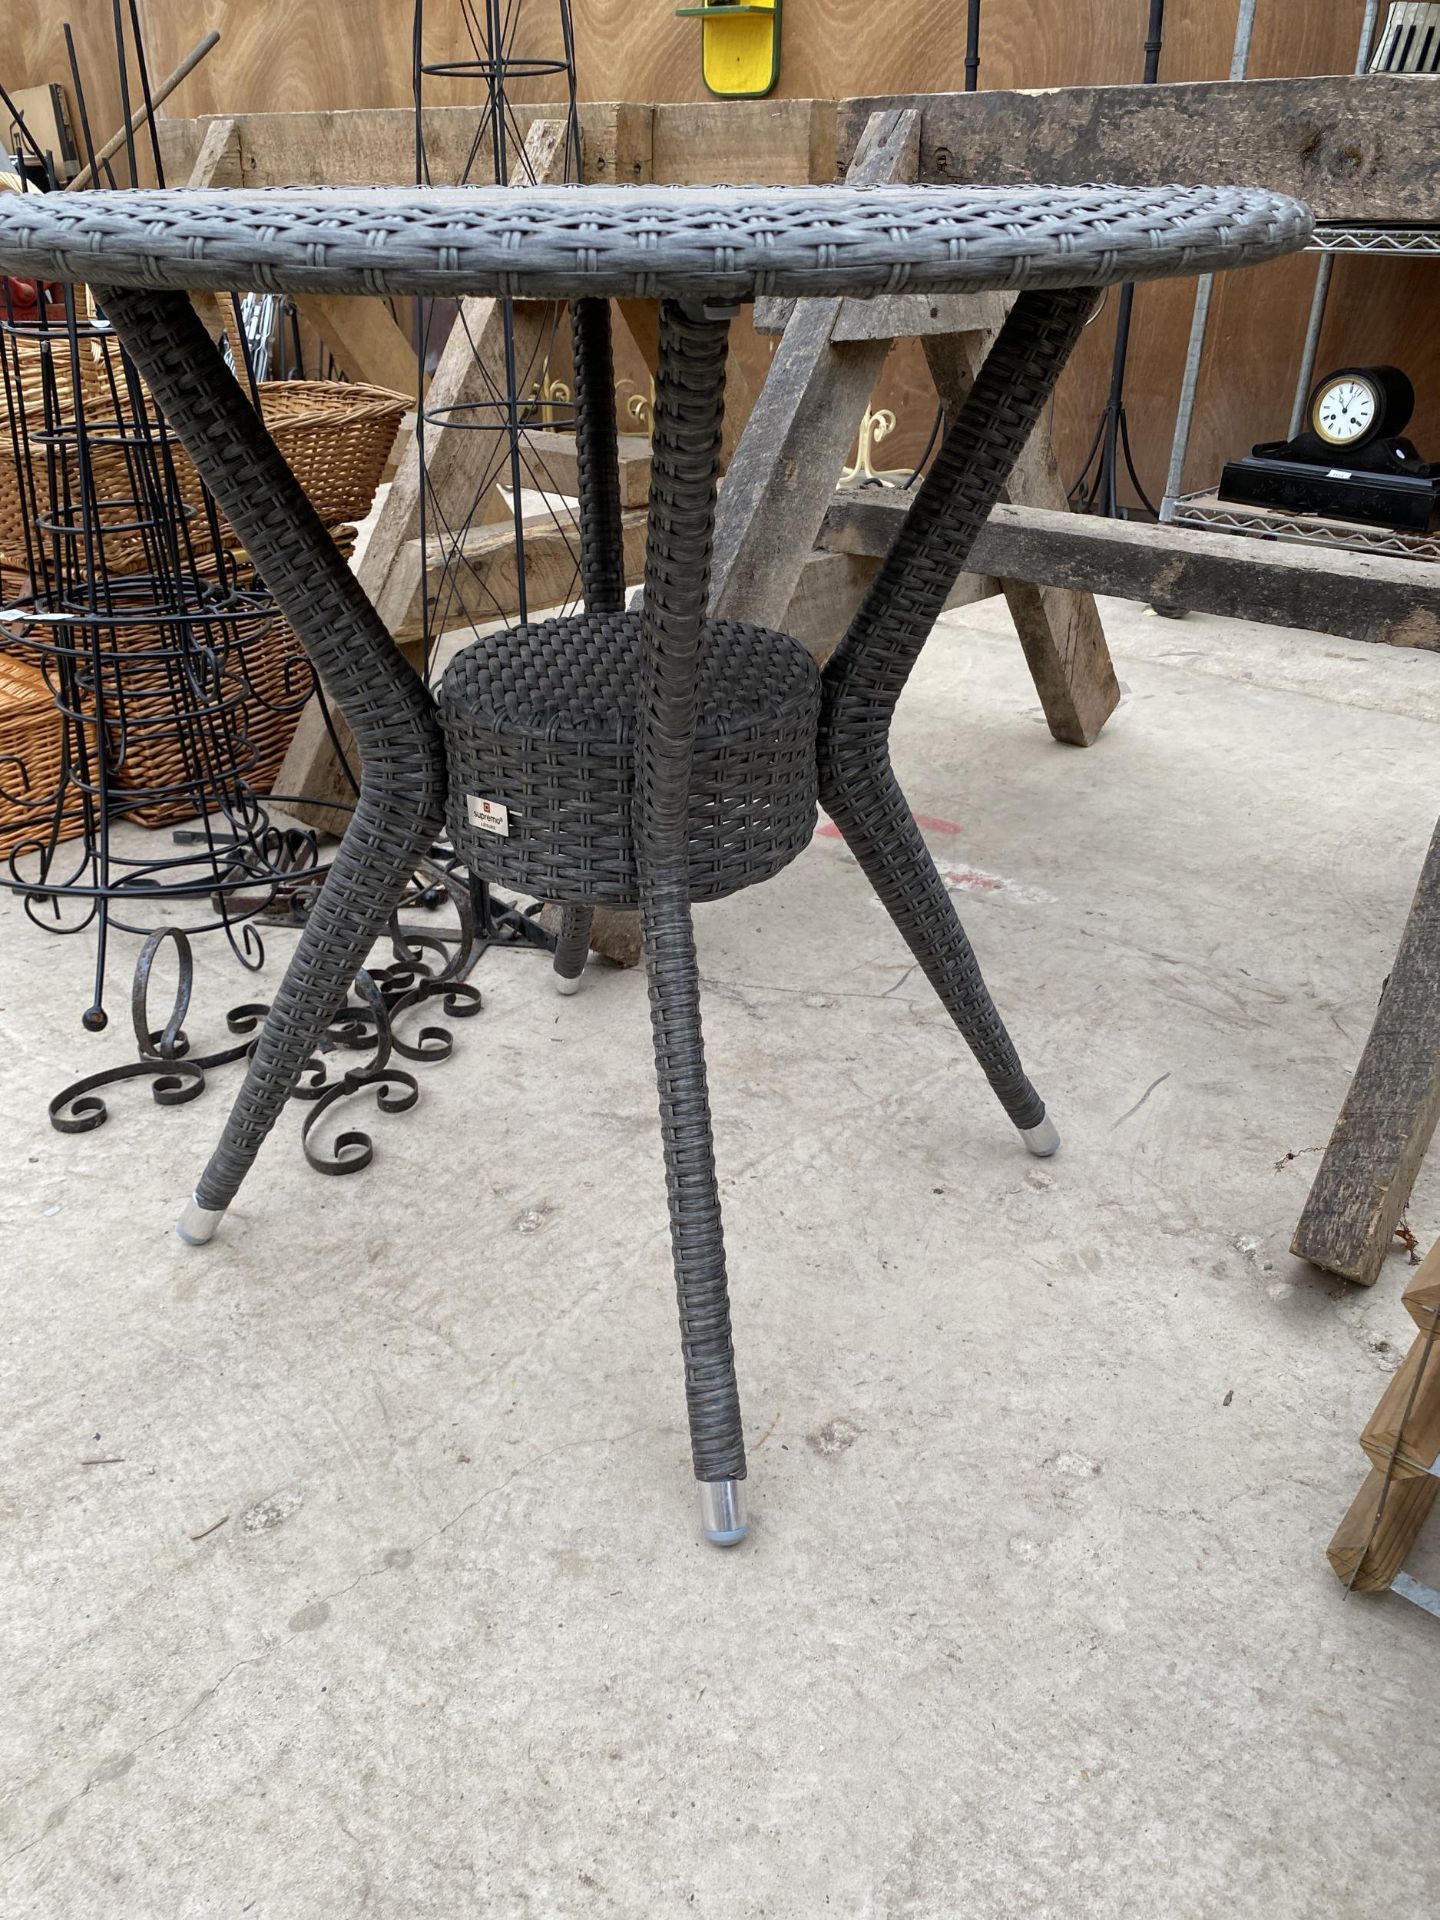 A RATTAN GLASS TOPPED BISTRO TABLE - Image 2 of 2